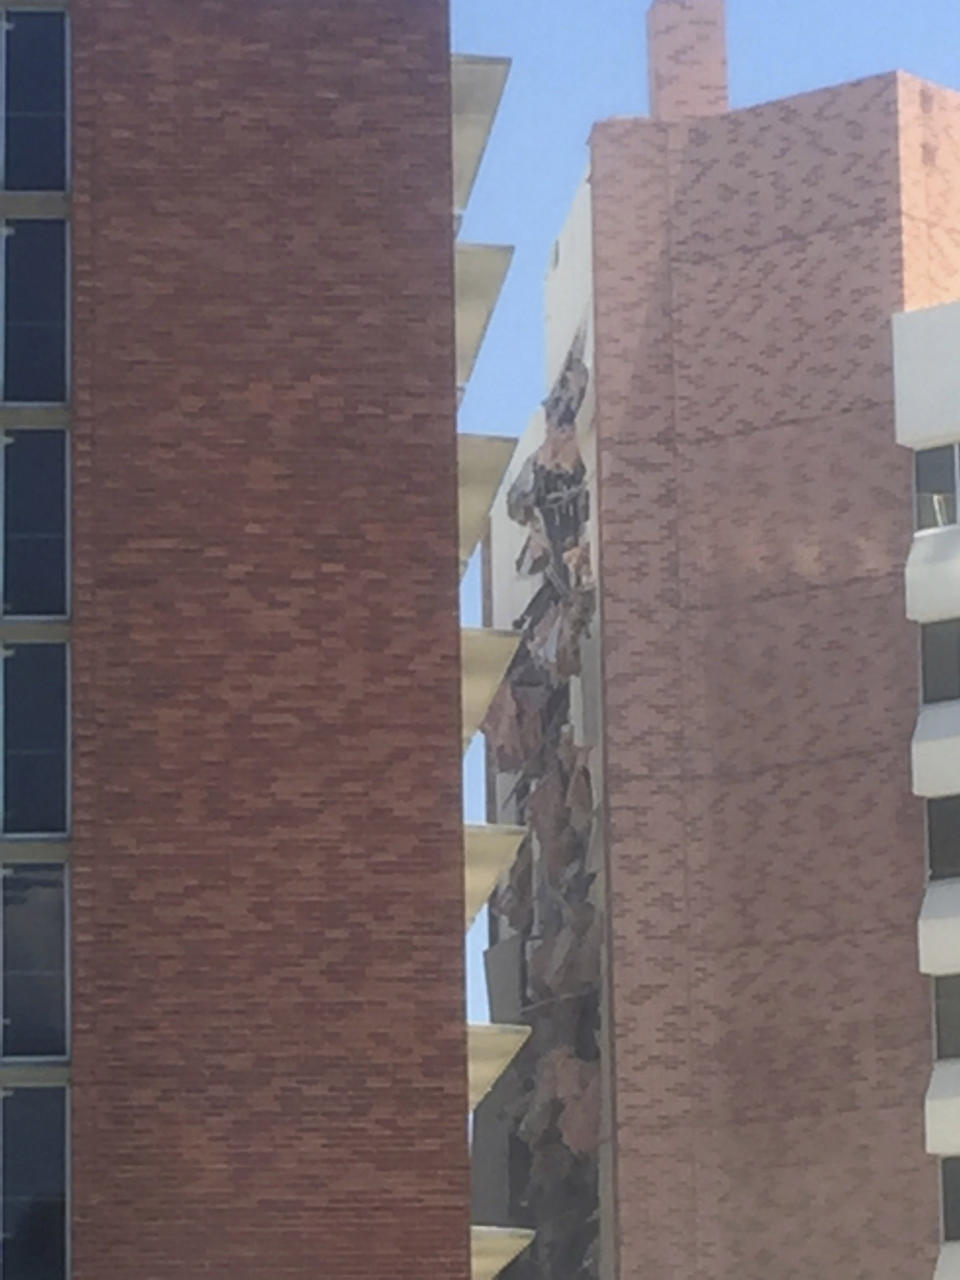 The aftermath of an explosion inside a residence hall at the University of Nevada, Reno in Reno, Nev., is visible on Friday, July 5, 2019. Police referred to the incident as a "utilities accident." There were no immediate reports of injuries. (Raymond Floyd via The AP)